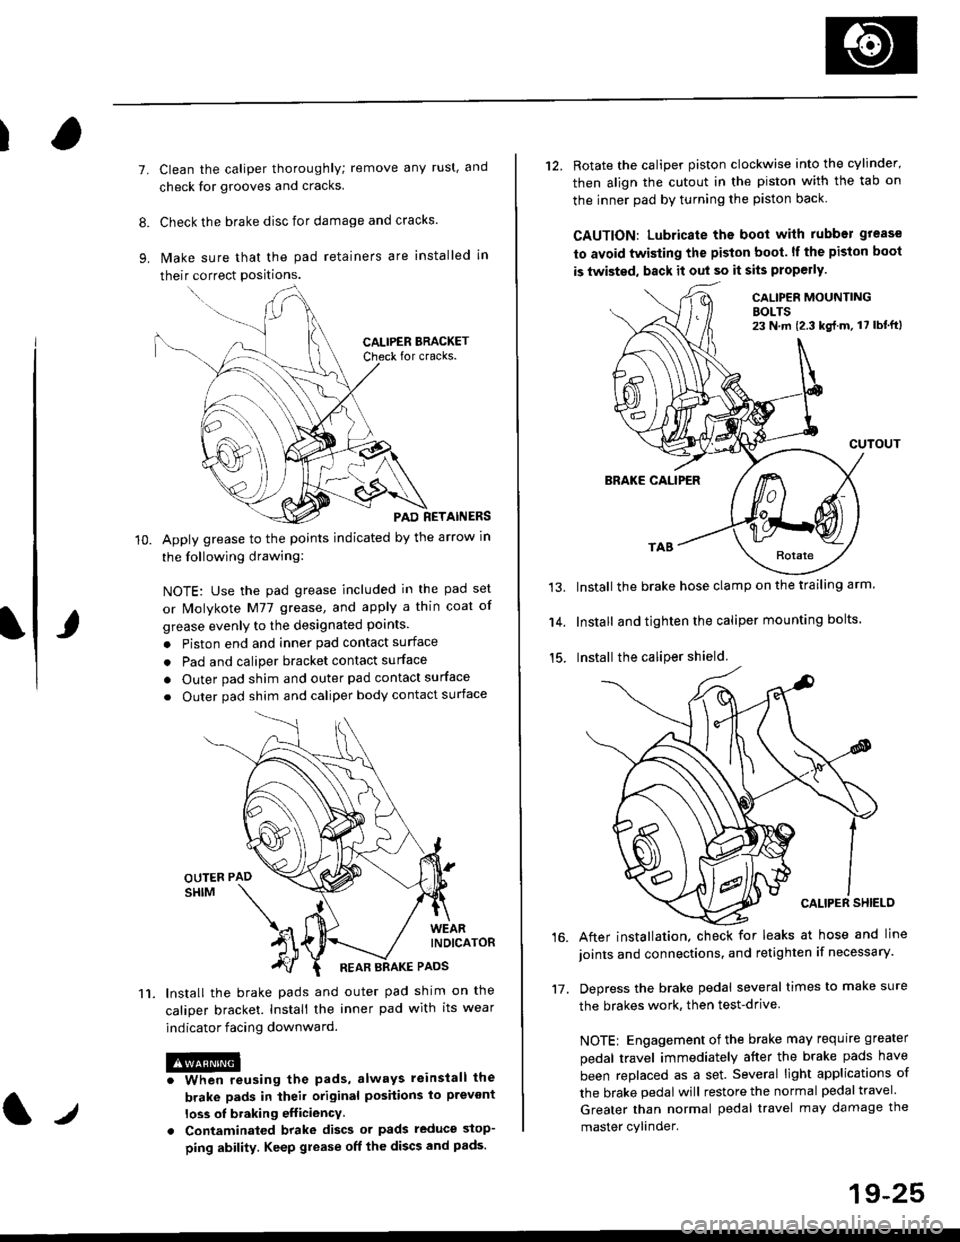 HONDA CIVIC 1996 6.G Owners Manual I
7.
11.
Clean the caliper thoroughly; remove any rust, and
check for grooves and cracks.
Check the brake disc for damage and cracks.
lvlake sure that the pad retainers are installed in
their correct 